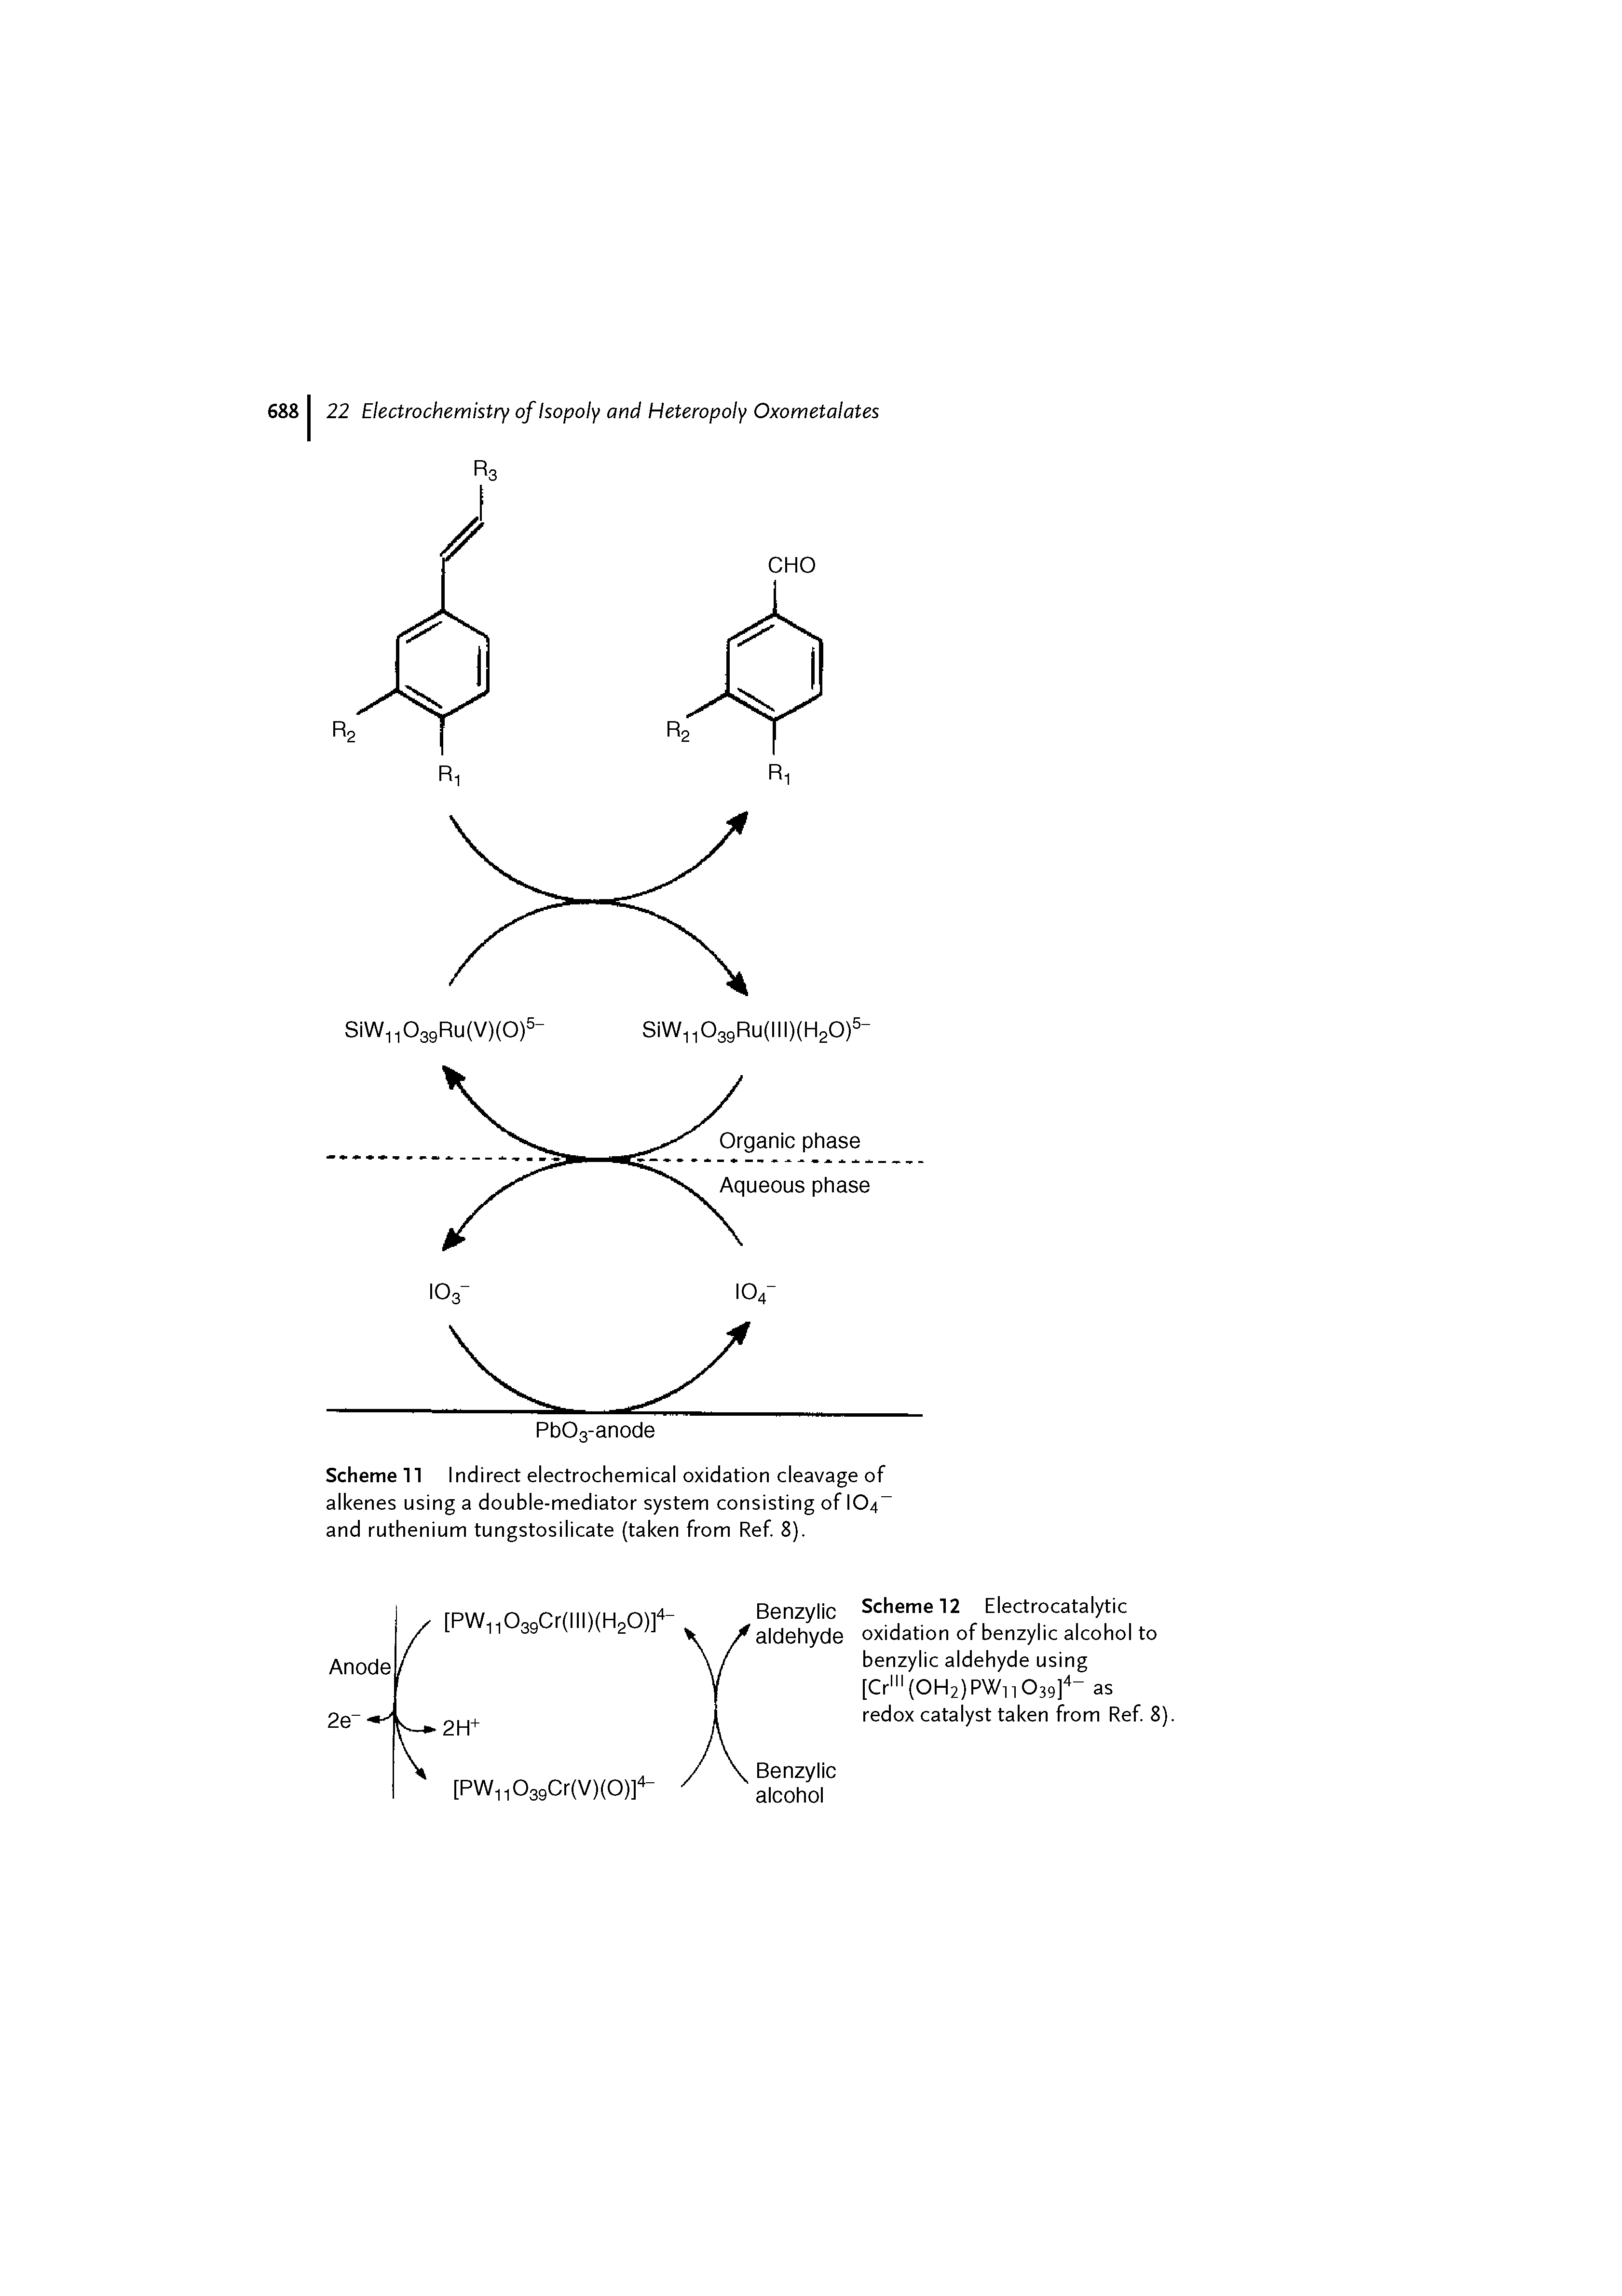 Scheme 12 Electrocatalytic oxidation of benzylic alcohol to benzylic aldehyde using [Cr" (0H2)PWii039] as redox catalyst taken from Ref 8).